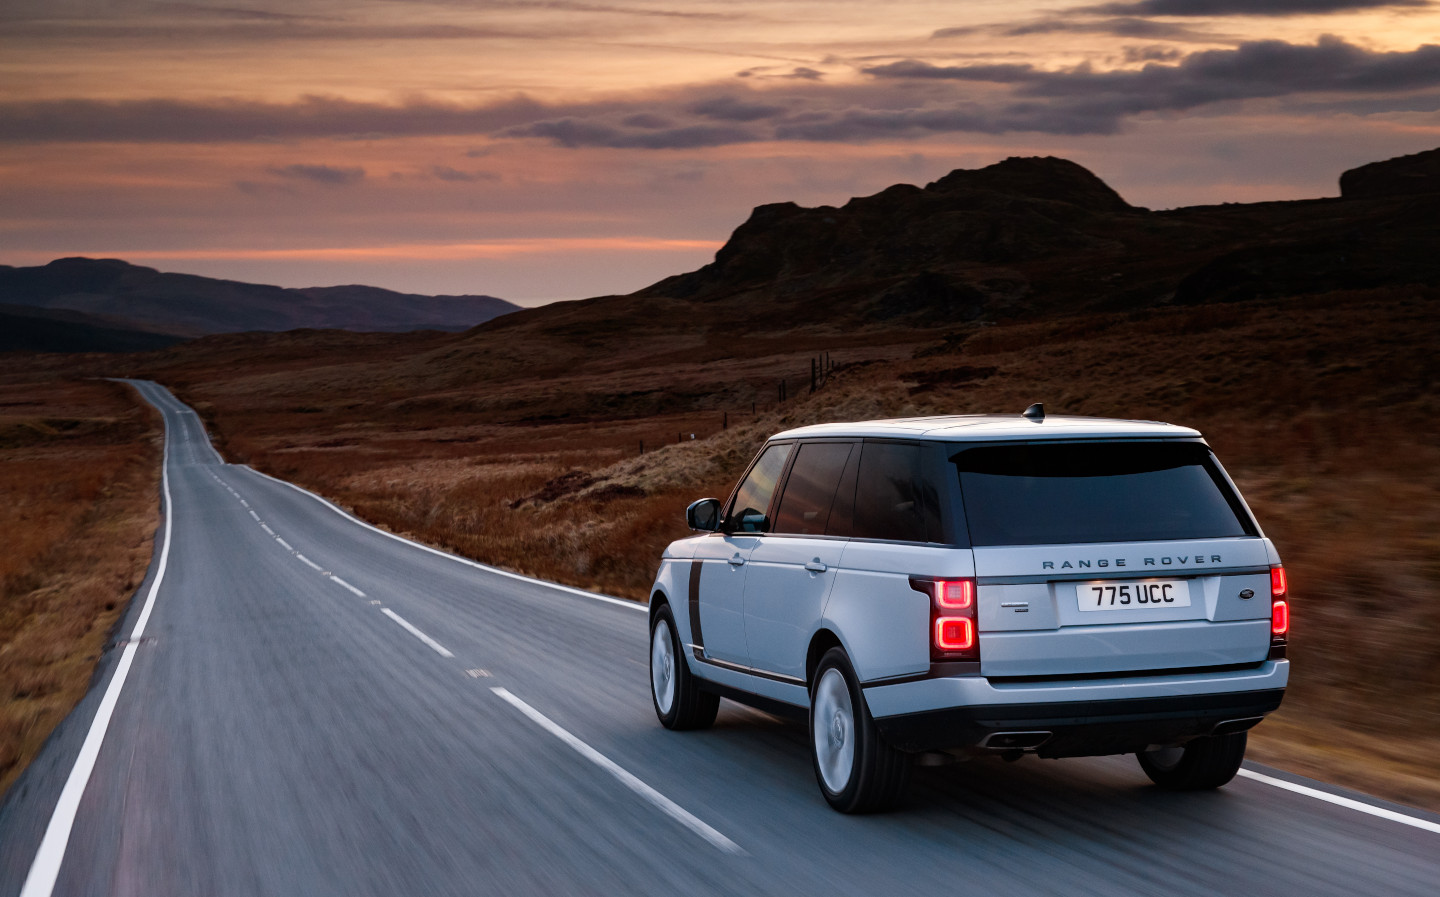 Electric Range Rover announced as one of six electric Land Rovers by 2026